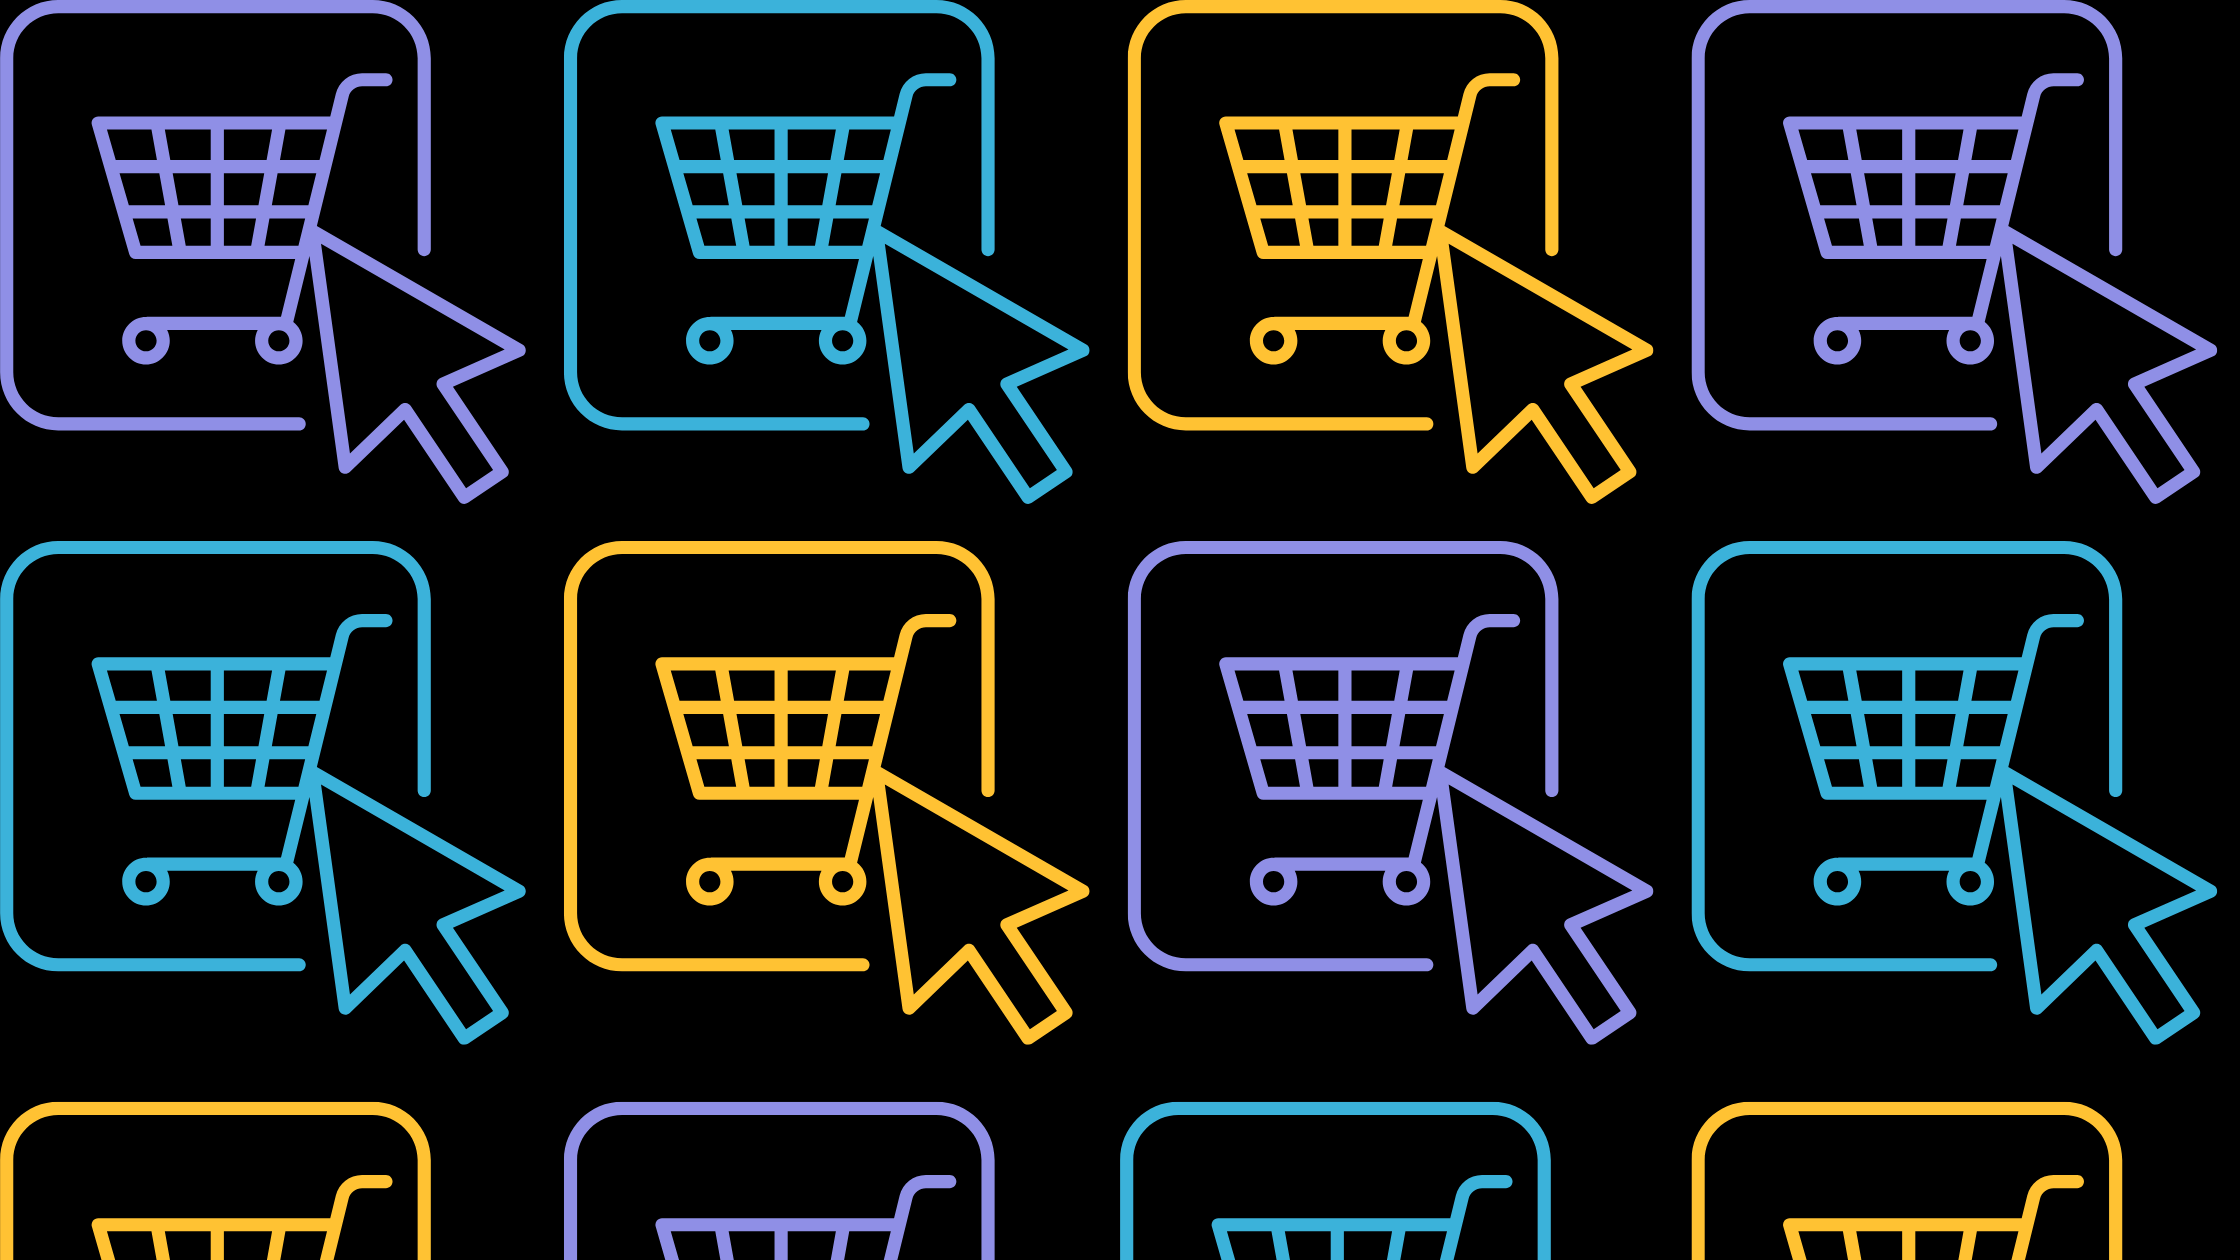 A repeating pattern of shopping cart icons with cursors clicking on them